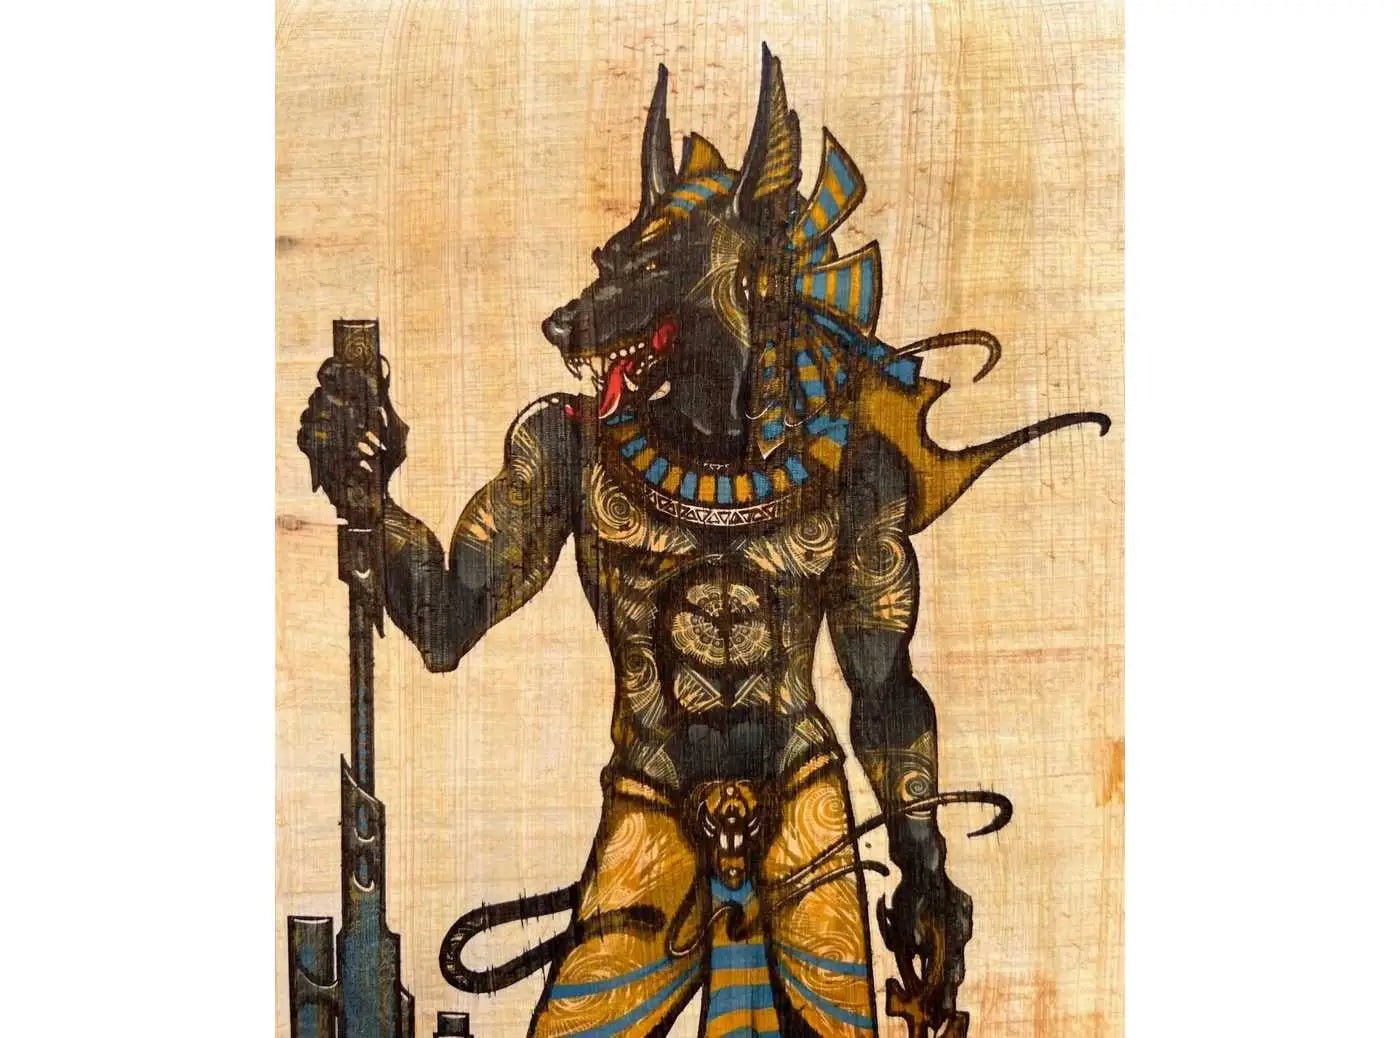 Egyptian God Anubis with A Weapon Illustration Printing on Egyptian Vintage Egypt Papyrus Paper